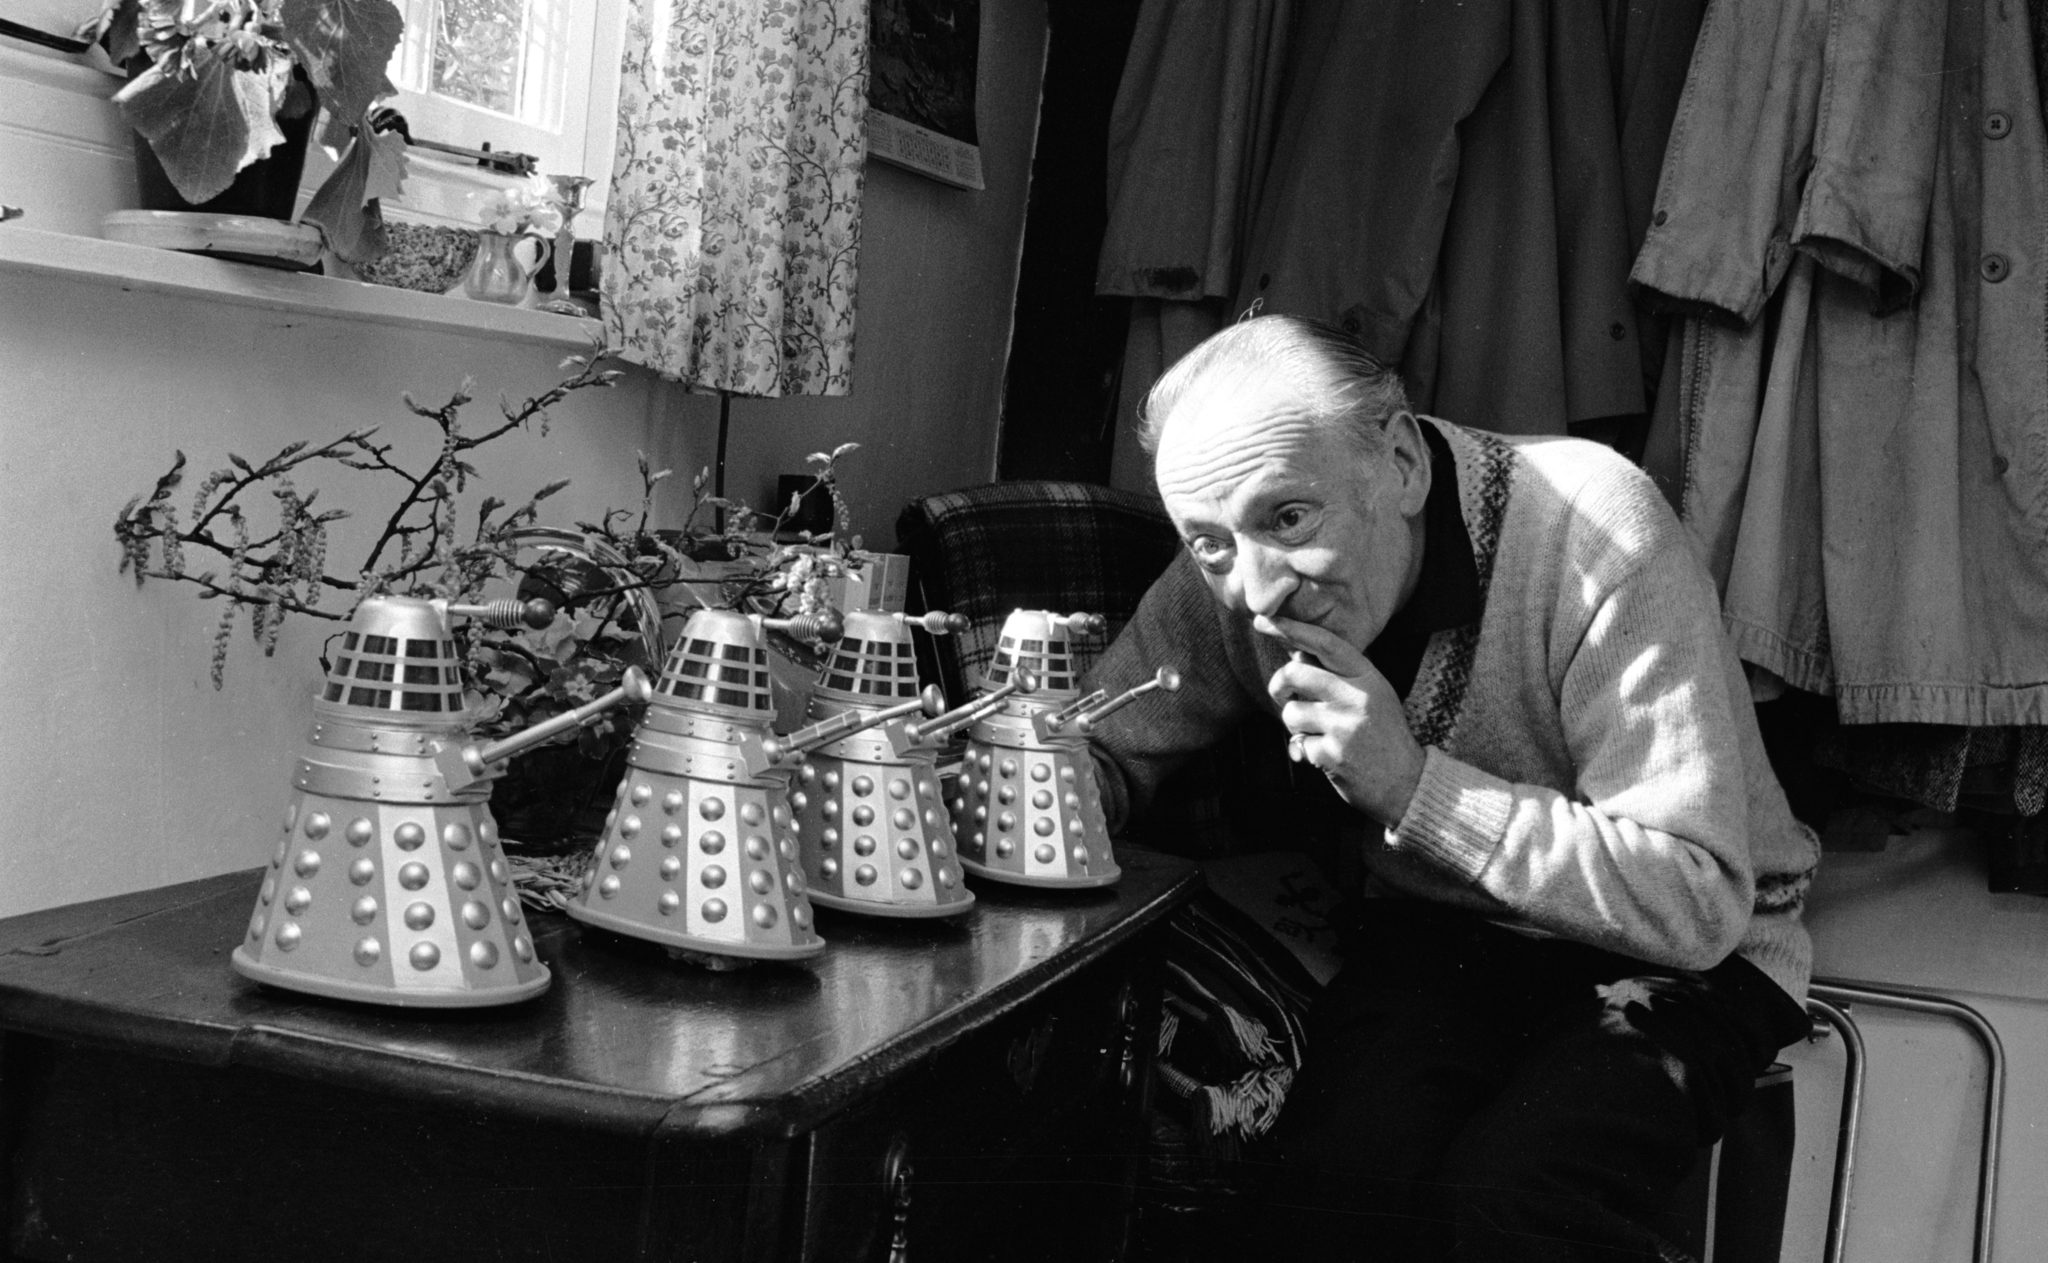 21st April 1965: British actor, William Hartnell (1908 - 1975) at home in Mayfield, Sussex with four miniature model Daleks - arch enemies of Hartnell's character Dr Who in the BBC's science-fiction series of the same name. Hartnell was the first of a series of actors to play the role.